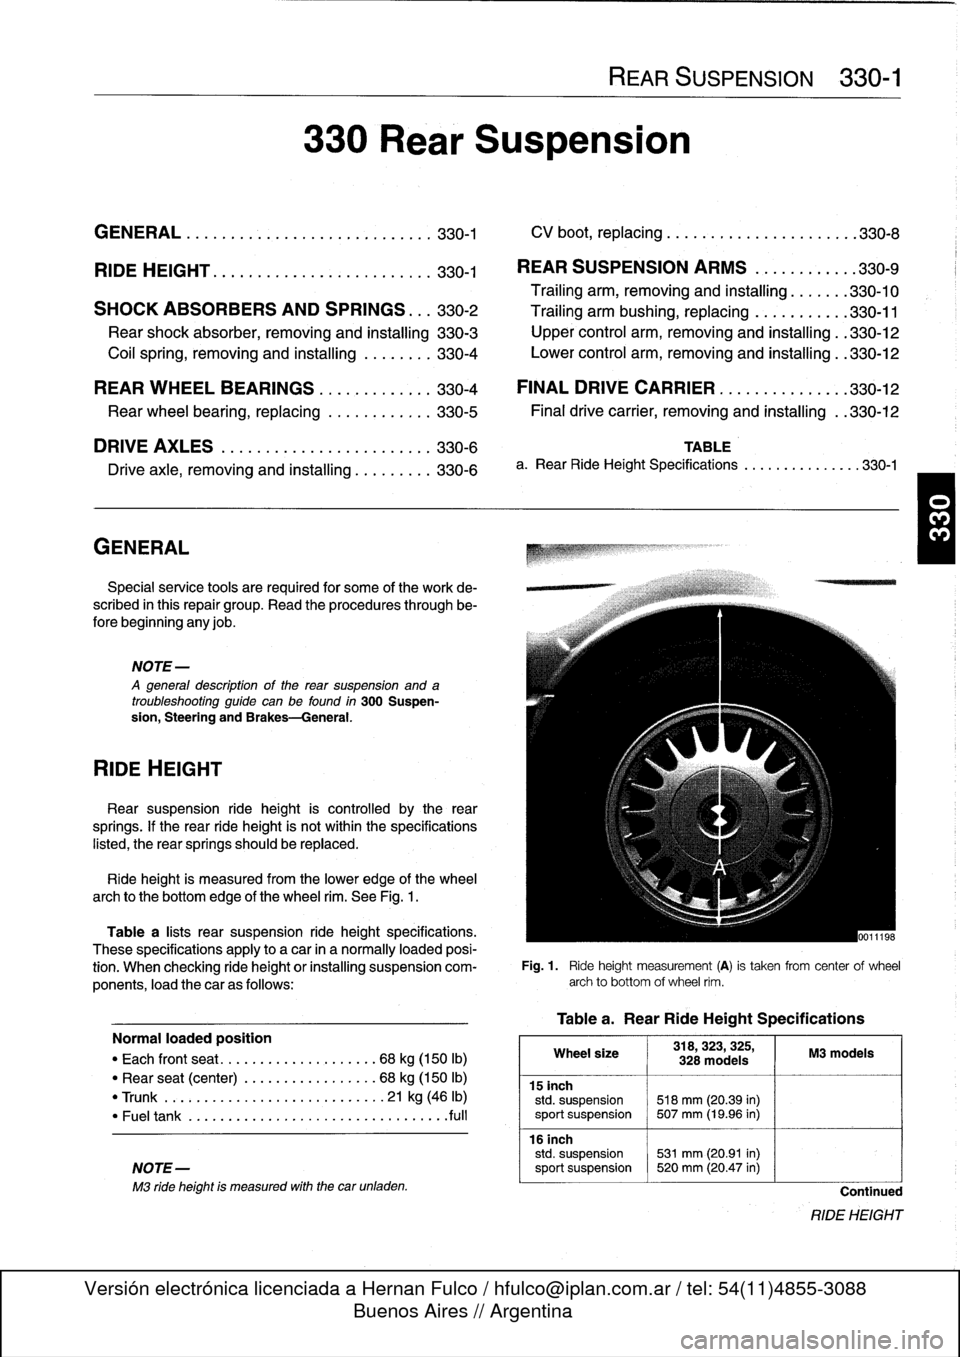 BMW 323i 1997 E36 Workshop Manual 
GENERAL
.......
.
.
.
.
.
.
.
.
.
.......
.
...
.330-1

	

CV
boot,
replacing
........
.
.
.
.........
.
.330-8

RIDE
HEIGHT
....
.
.
.
.
.
...
.
...
.
.
.
.
.
...
.
330-1

	

REAR
SUSPENSION
ARMS
.
